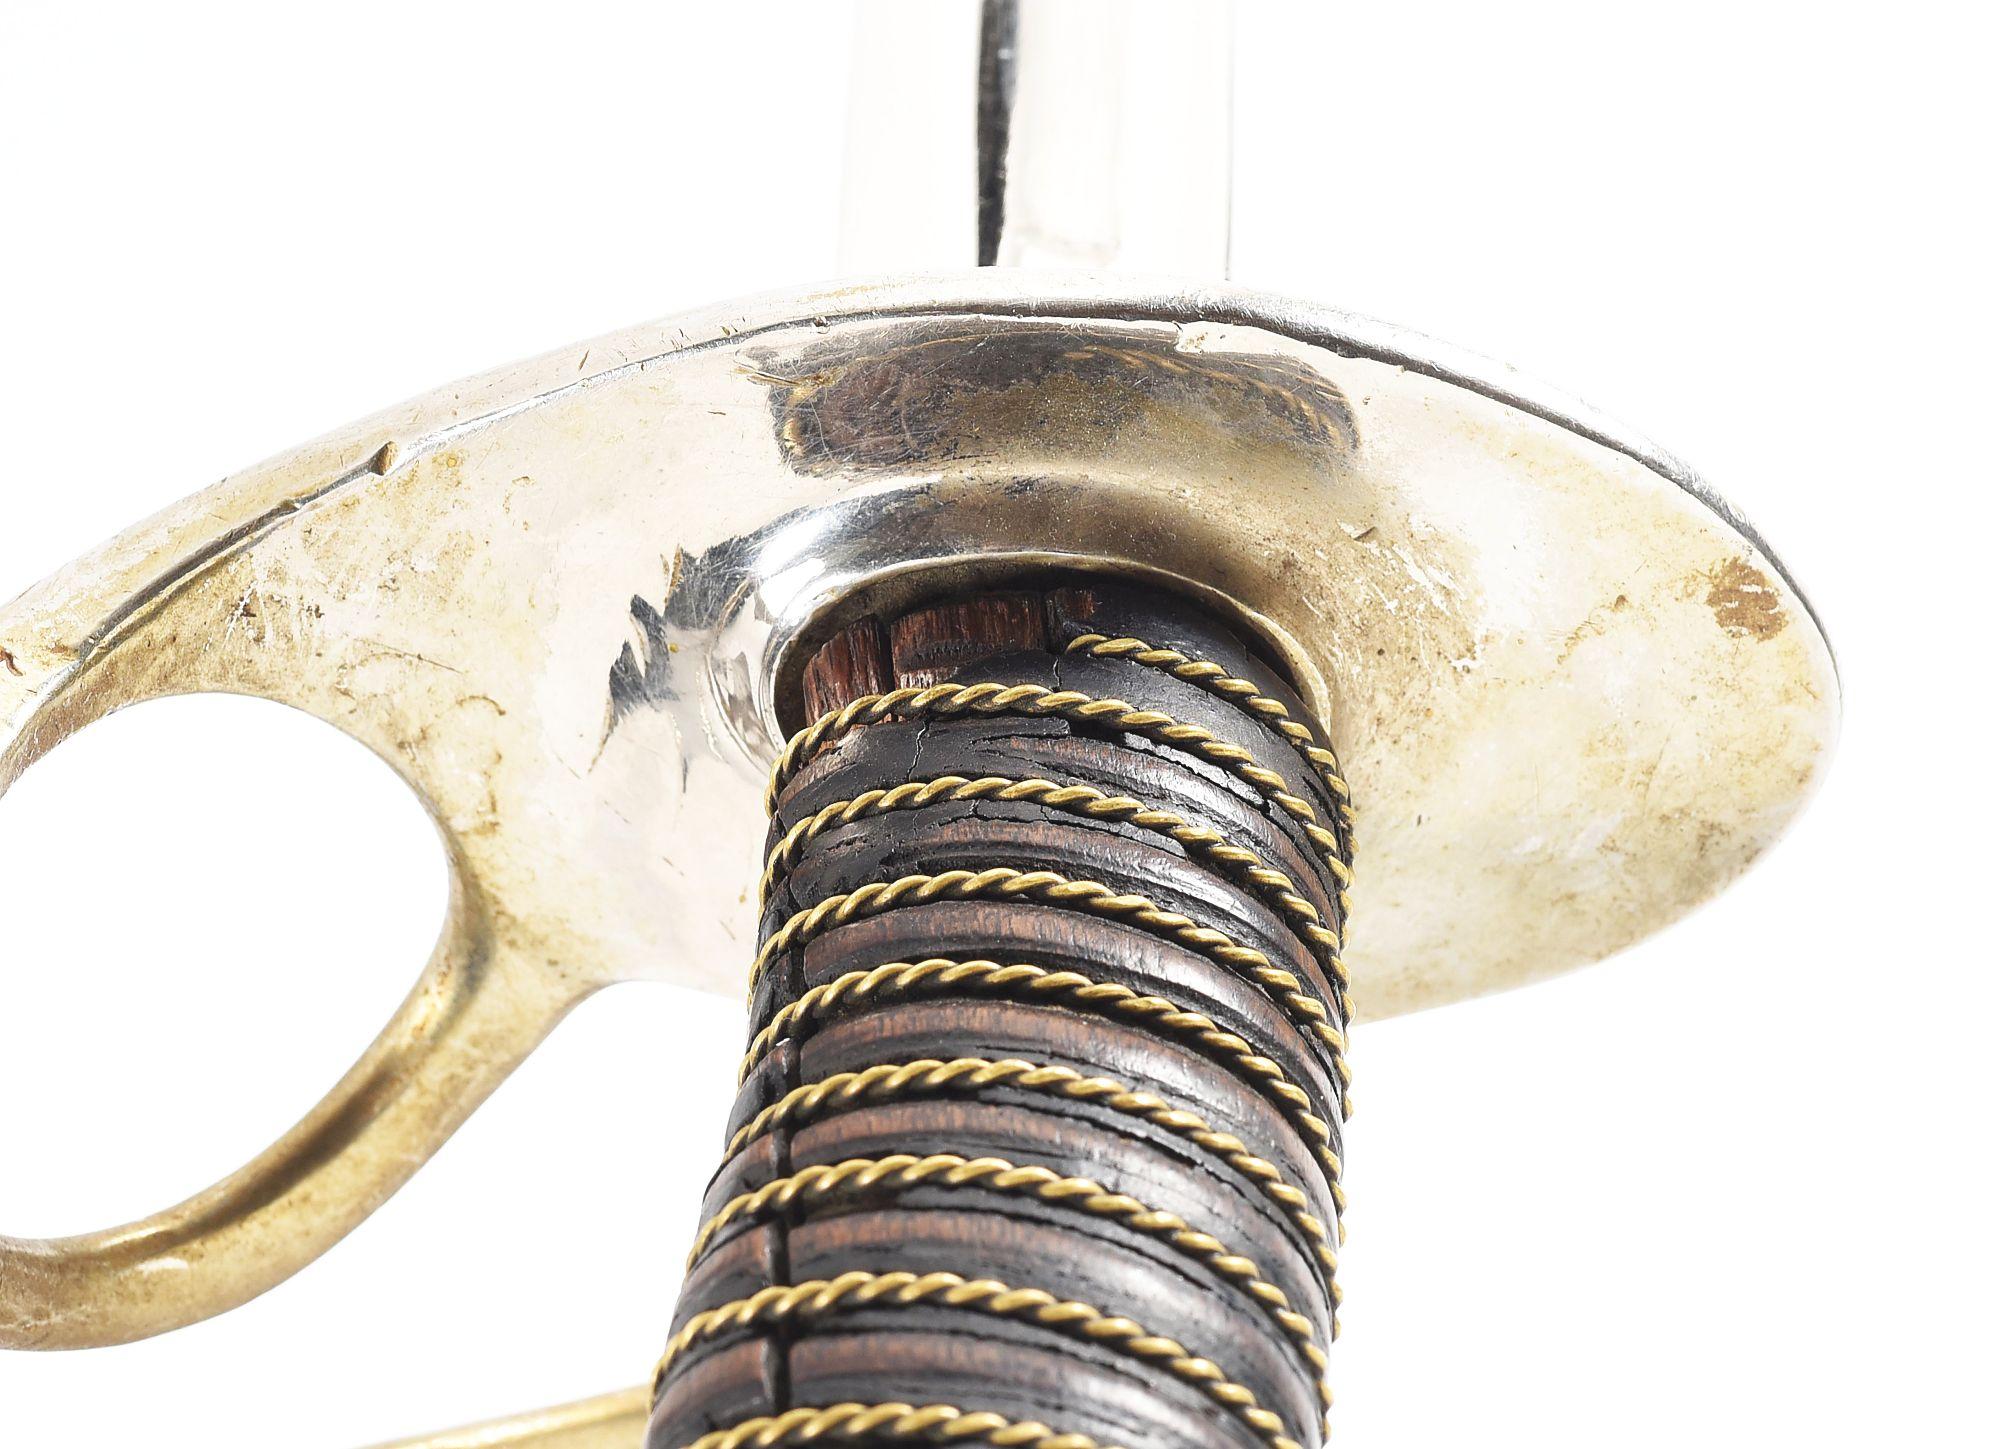 7TH CAVALRY UNIT MARKED MODEL 1860 CAVALRY SABER CARRIED BY EDWARD MATHEY, COMMANDING OFFICER COMPAN